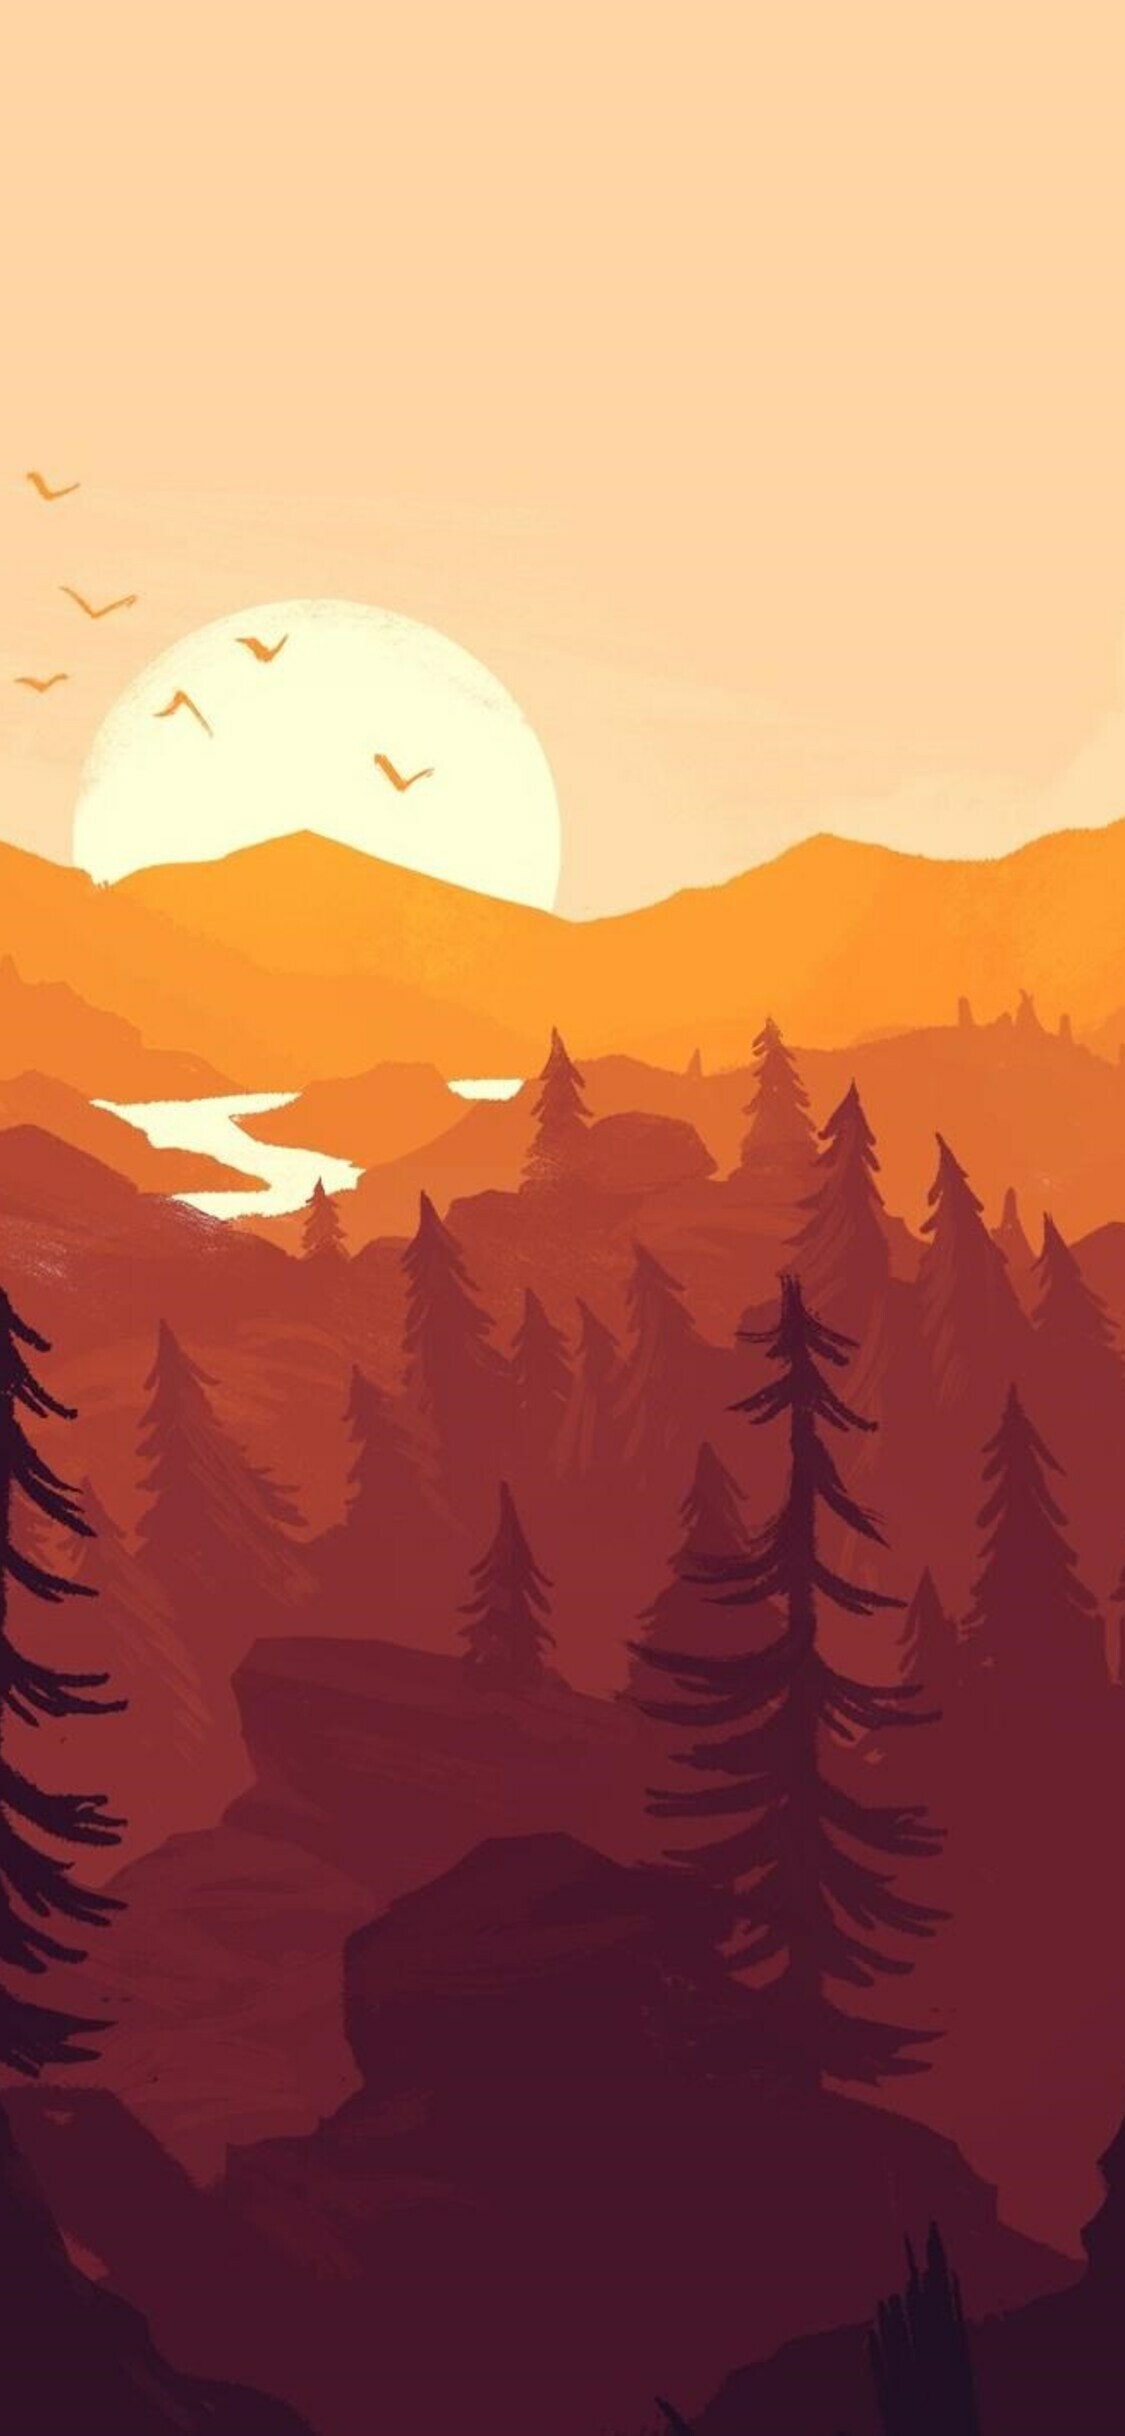 Firewatch: The indie adventure game from Campo Santo. 1130x2440 HD Wallpaper.